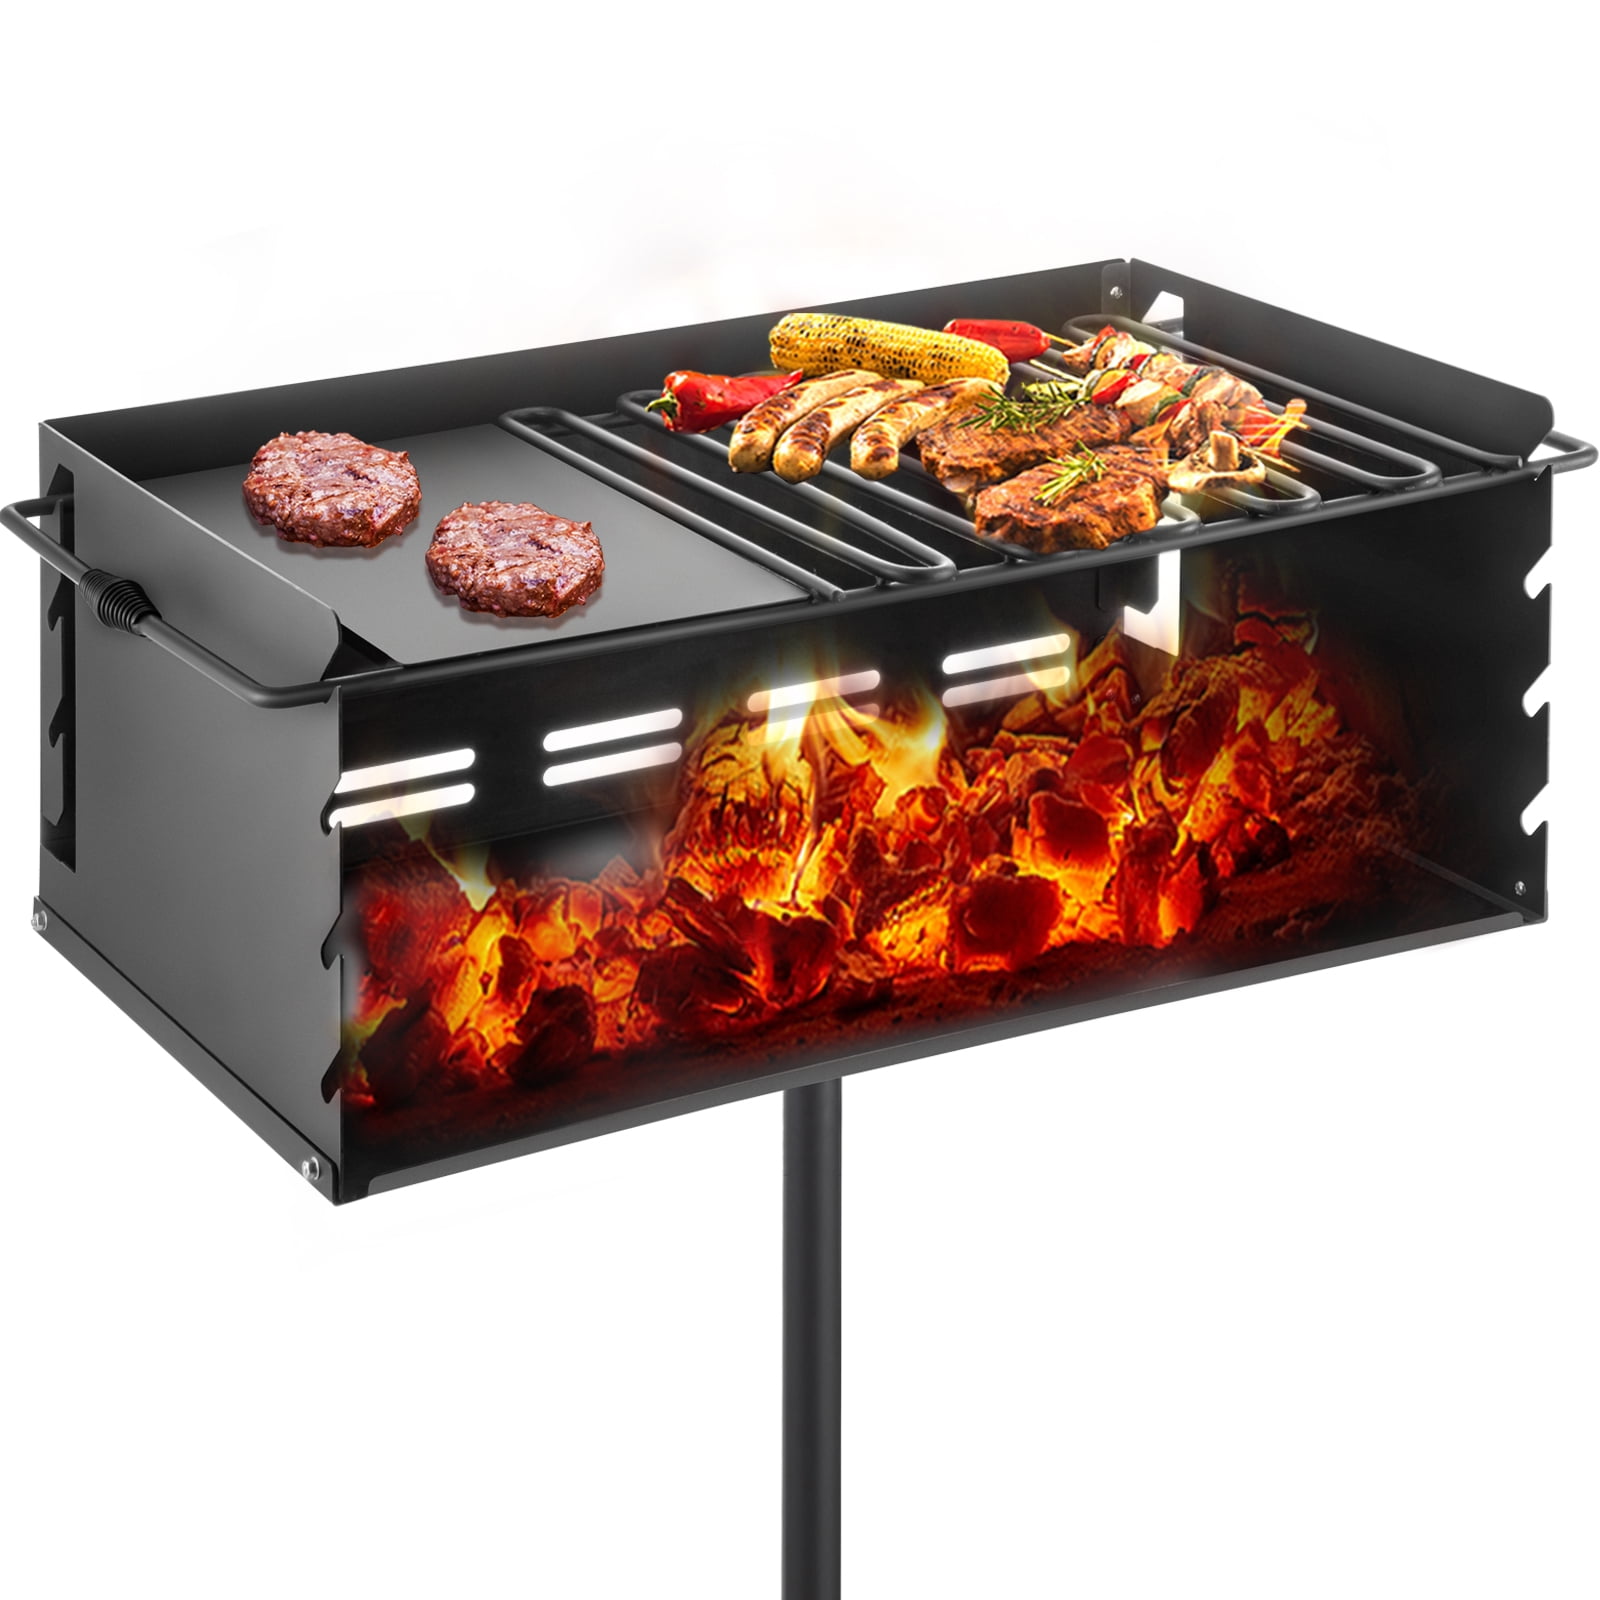 selvbiografi toksicitet pilot VEVOR Outdoor Park Style Grill 24x16 inch Charcoal Grill Carbon Steel Park  Style BBQ Grill Height 50-in Adjustable Charcoal Grill with Stainless Steel  Grate Outdoor Park Grill, In-ground Pillar - Walmart.com